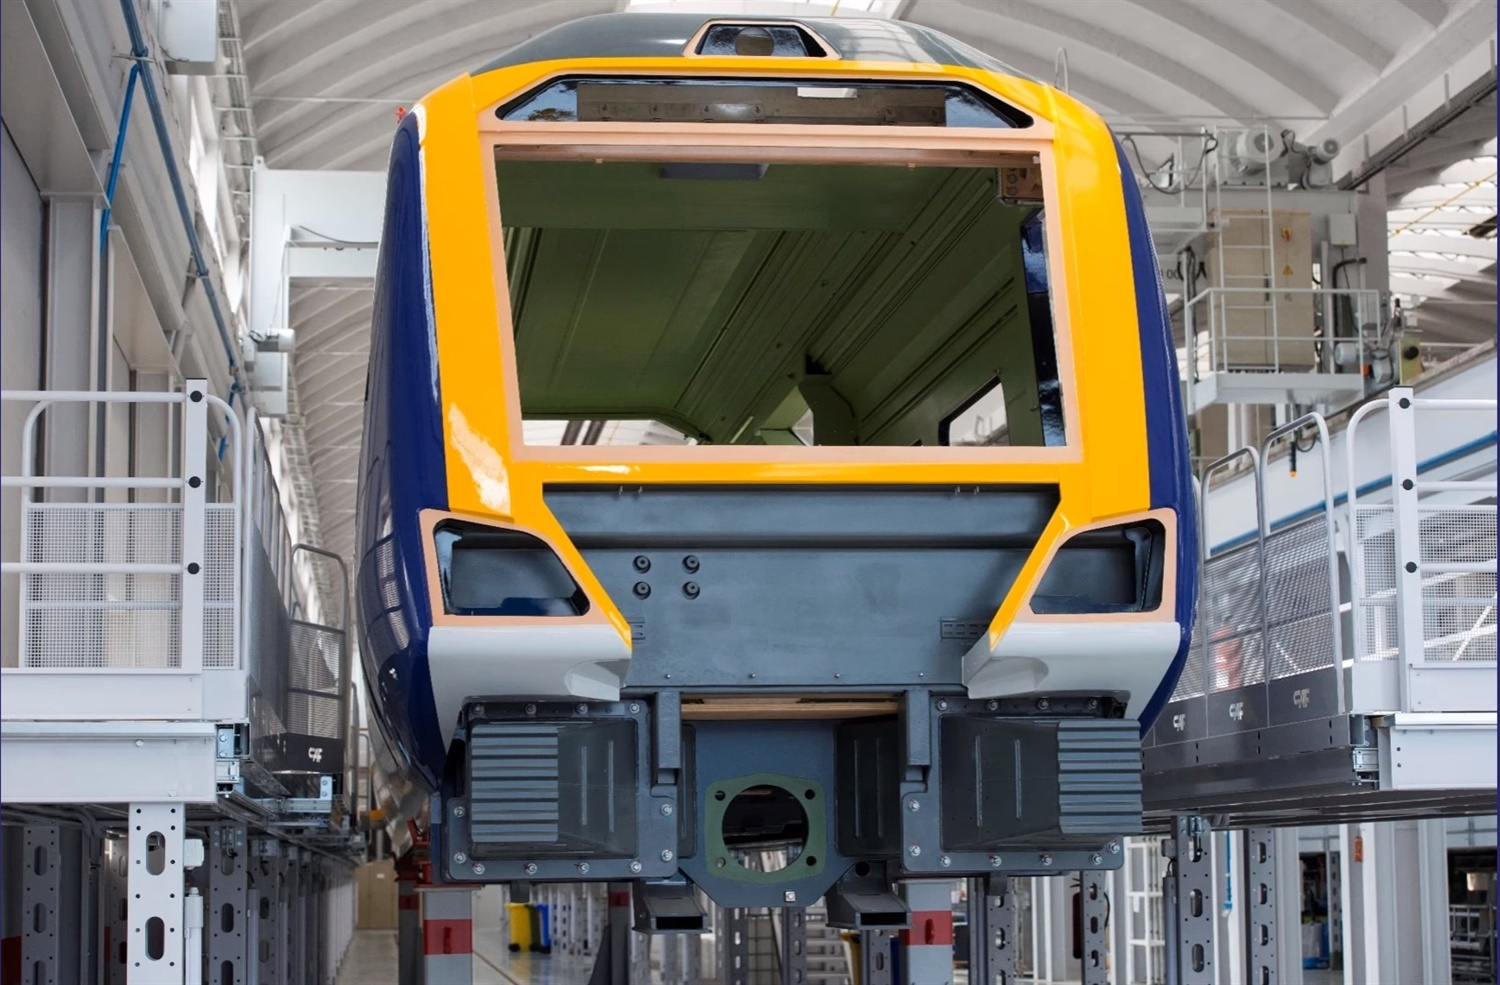 Bodyshells of new Northern rolling stock ‘coming together’ 